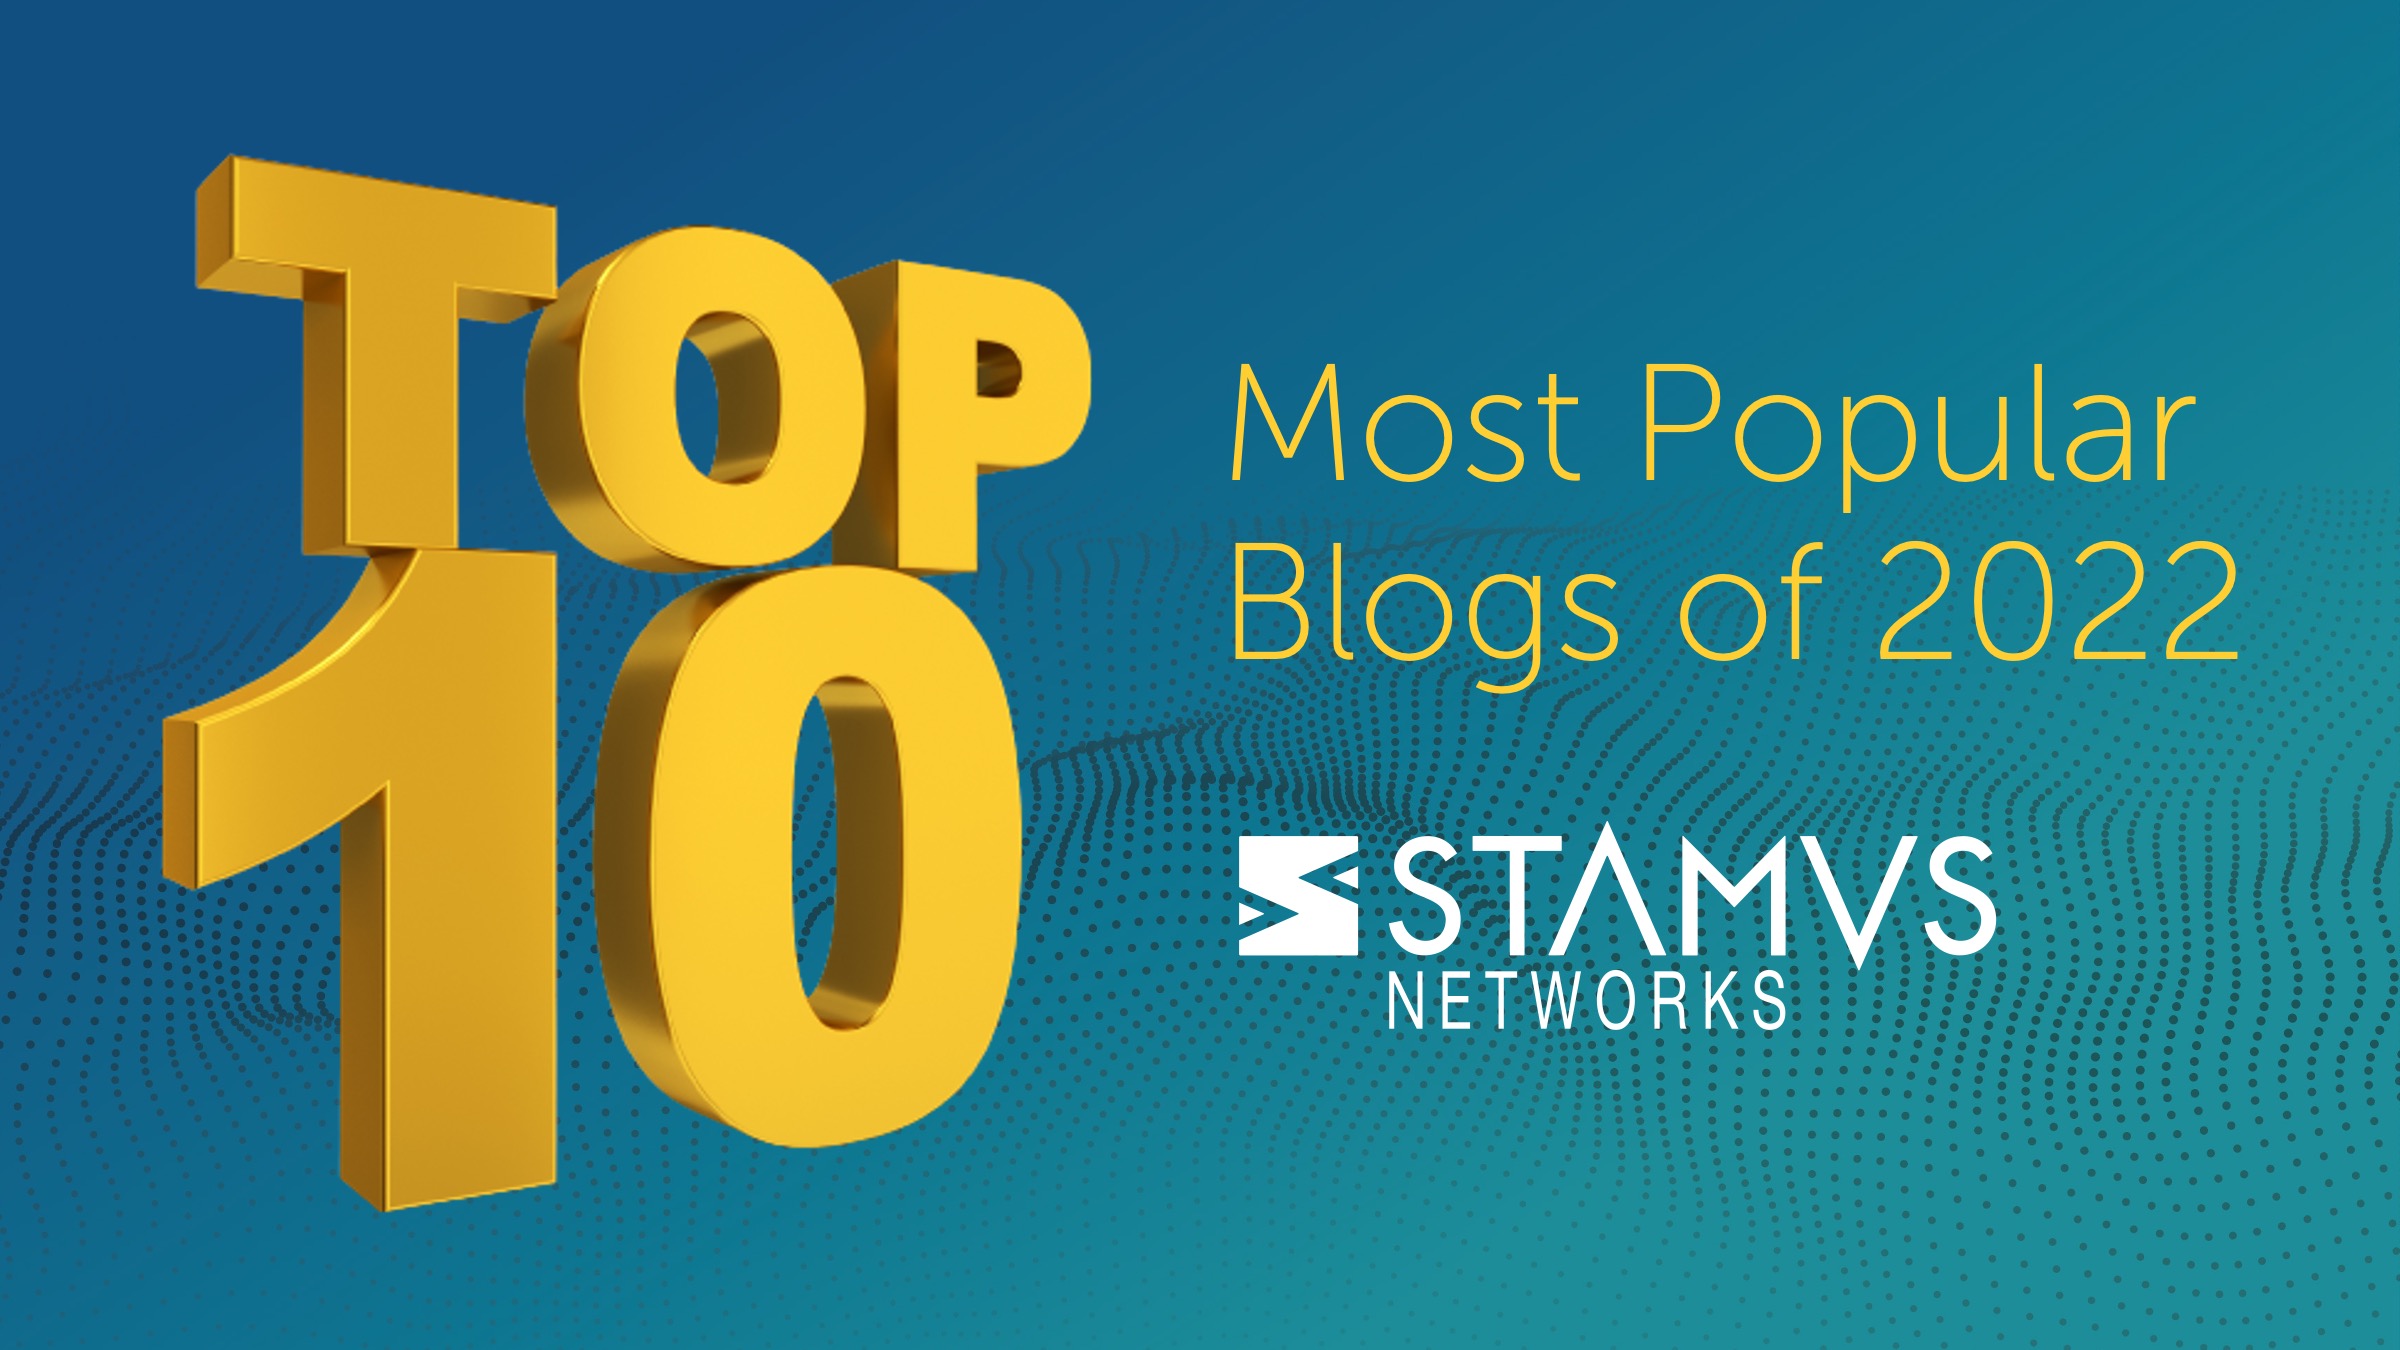 Top 10 Most Popular Blogs of 2022 by Stamus Networks